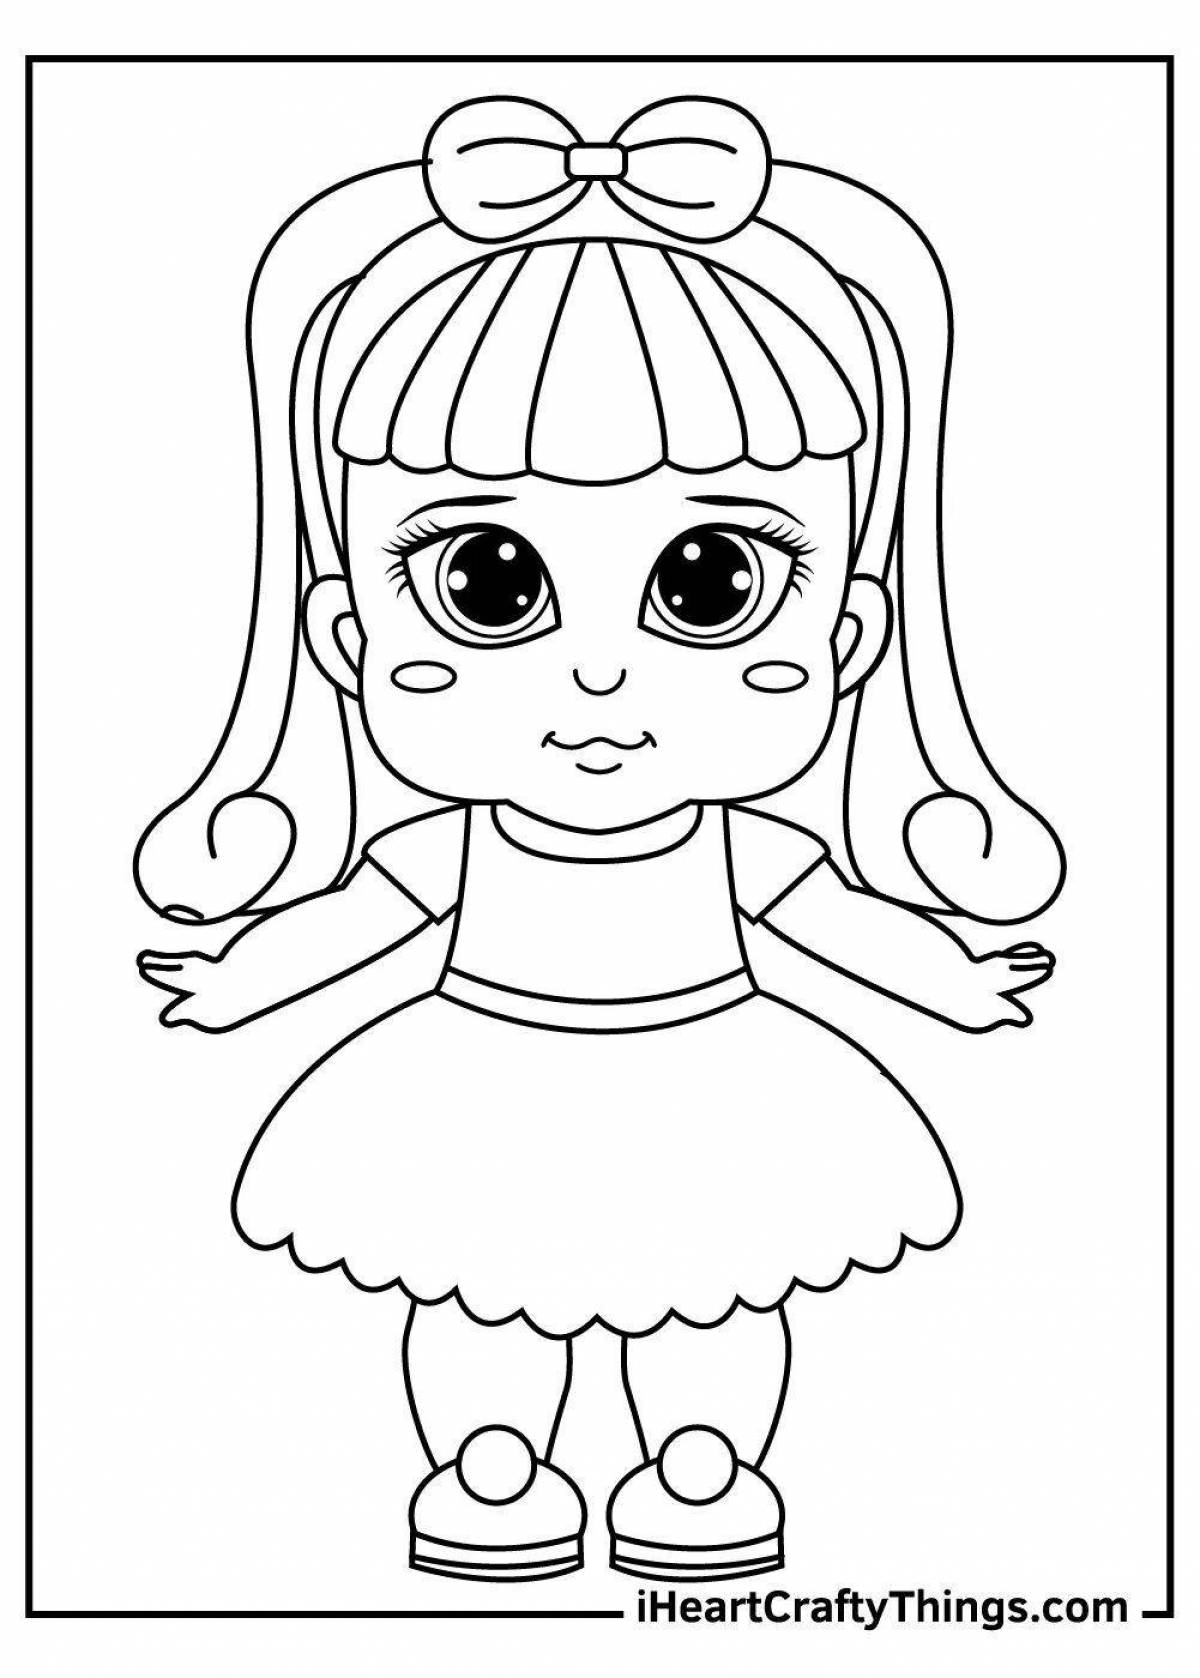 Fun coloring doll for 6-7 year olds